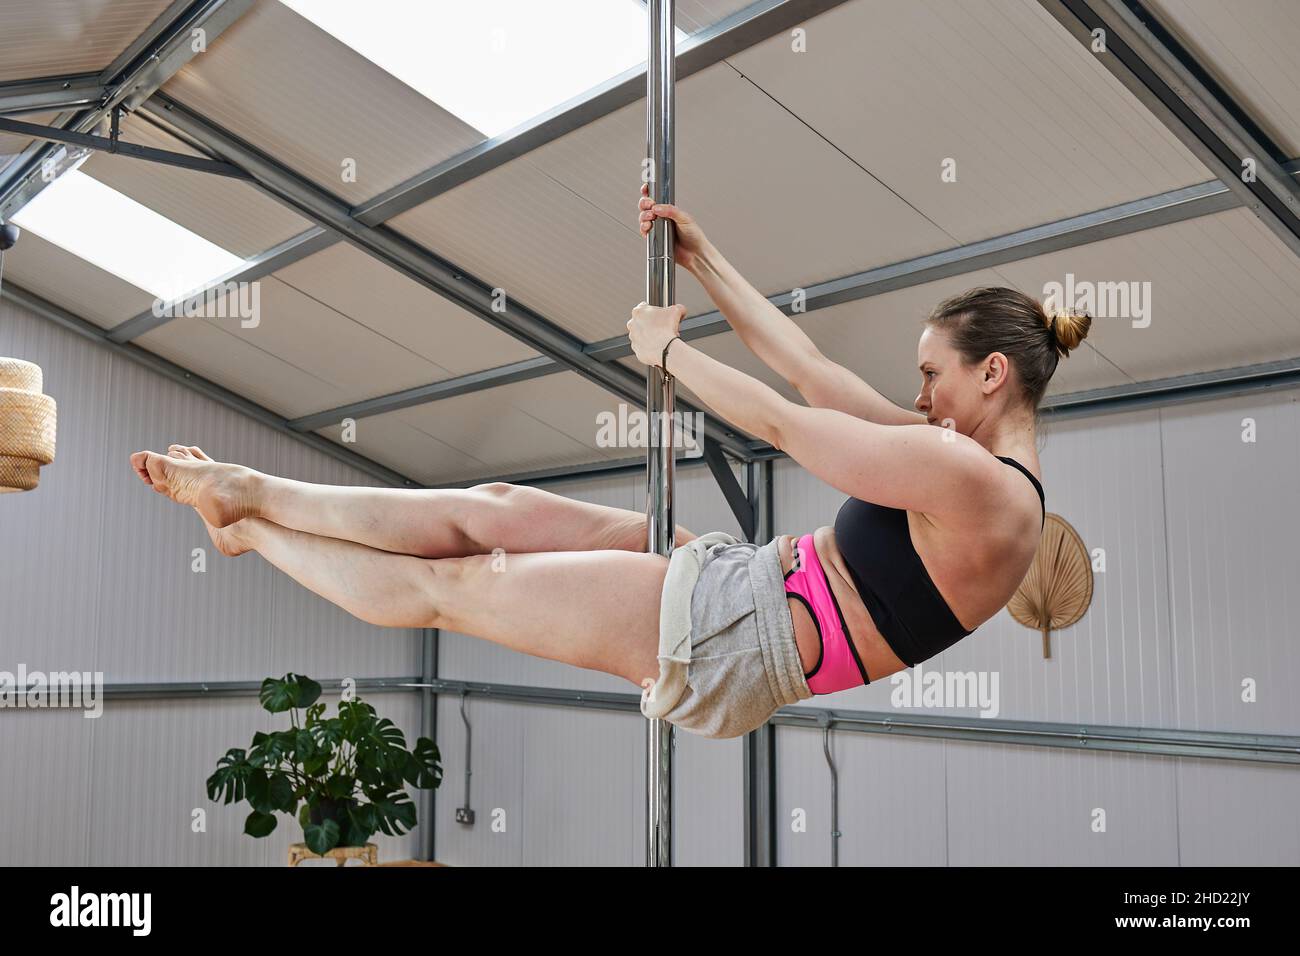 woman suspended in pole dance bar, with good age physique in the 40s Stock Photo